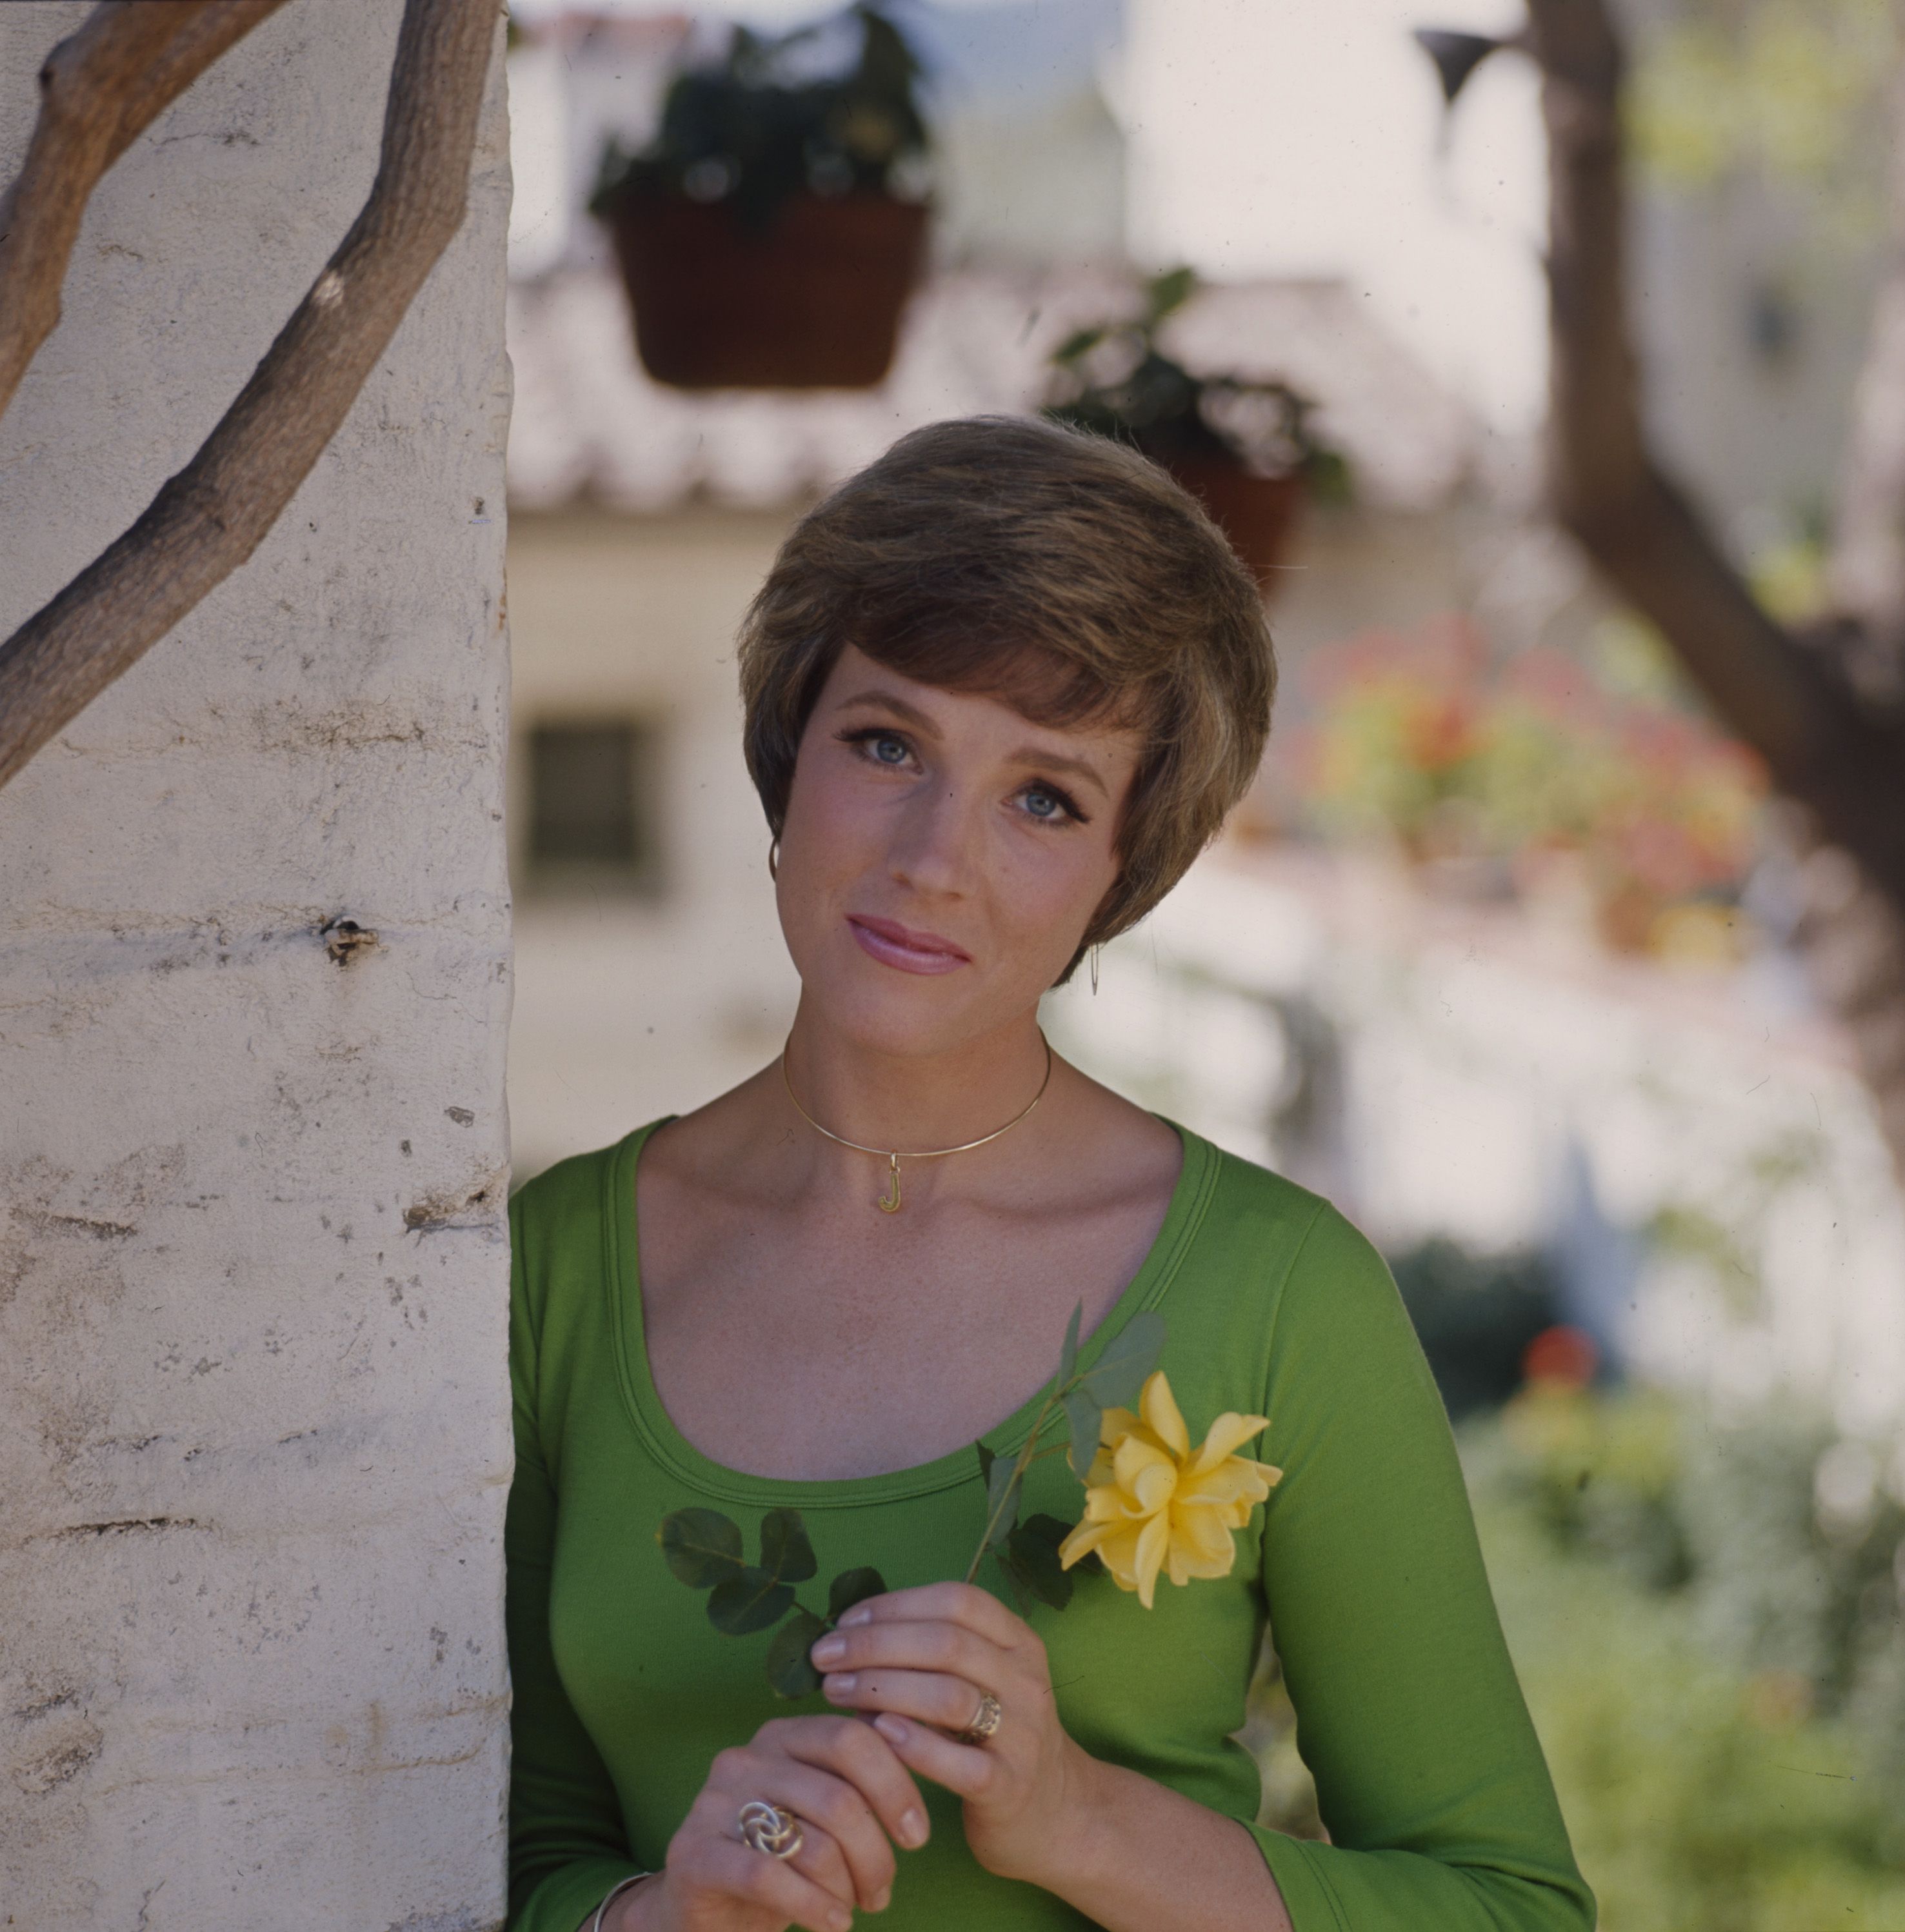 PHOTO JULIE ANDREWS REF AND011220141 